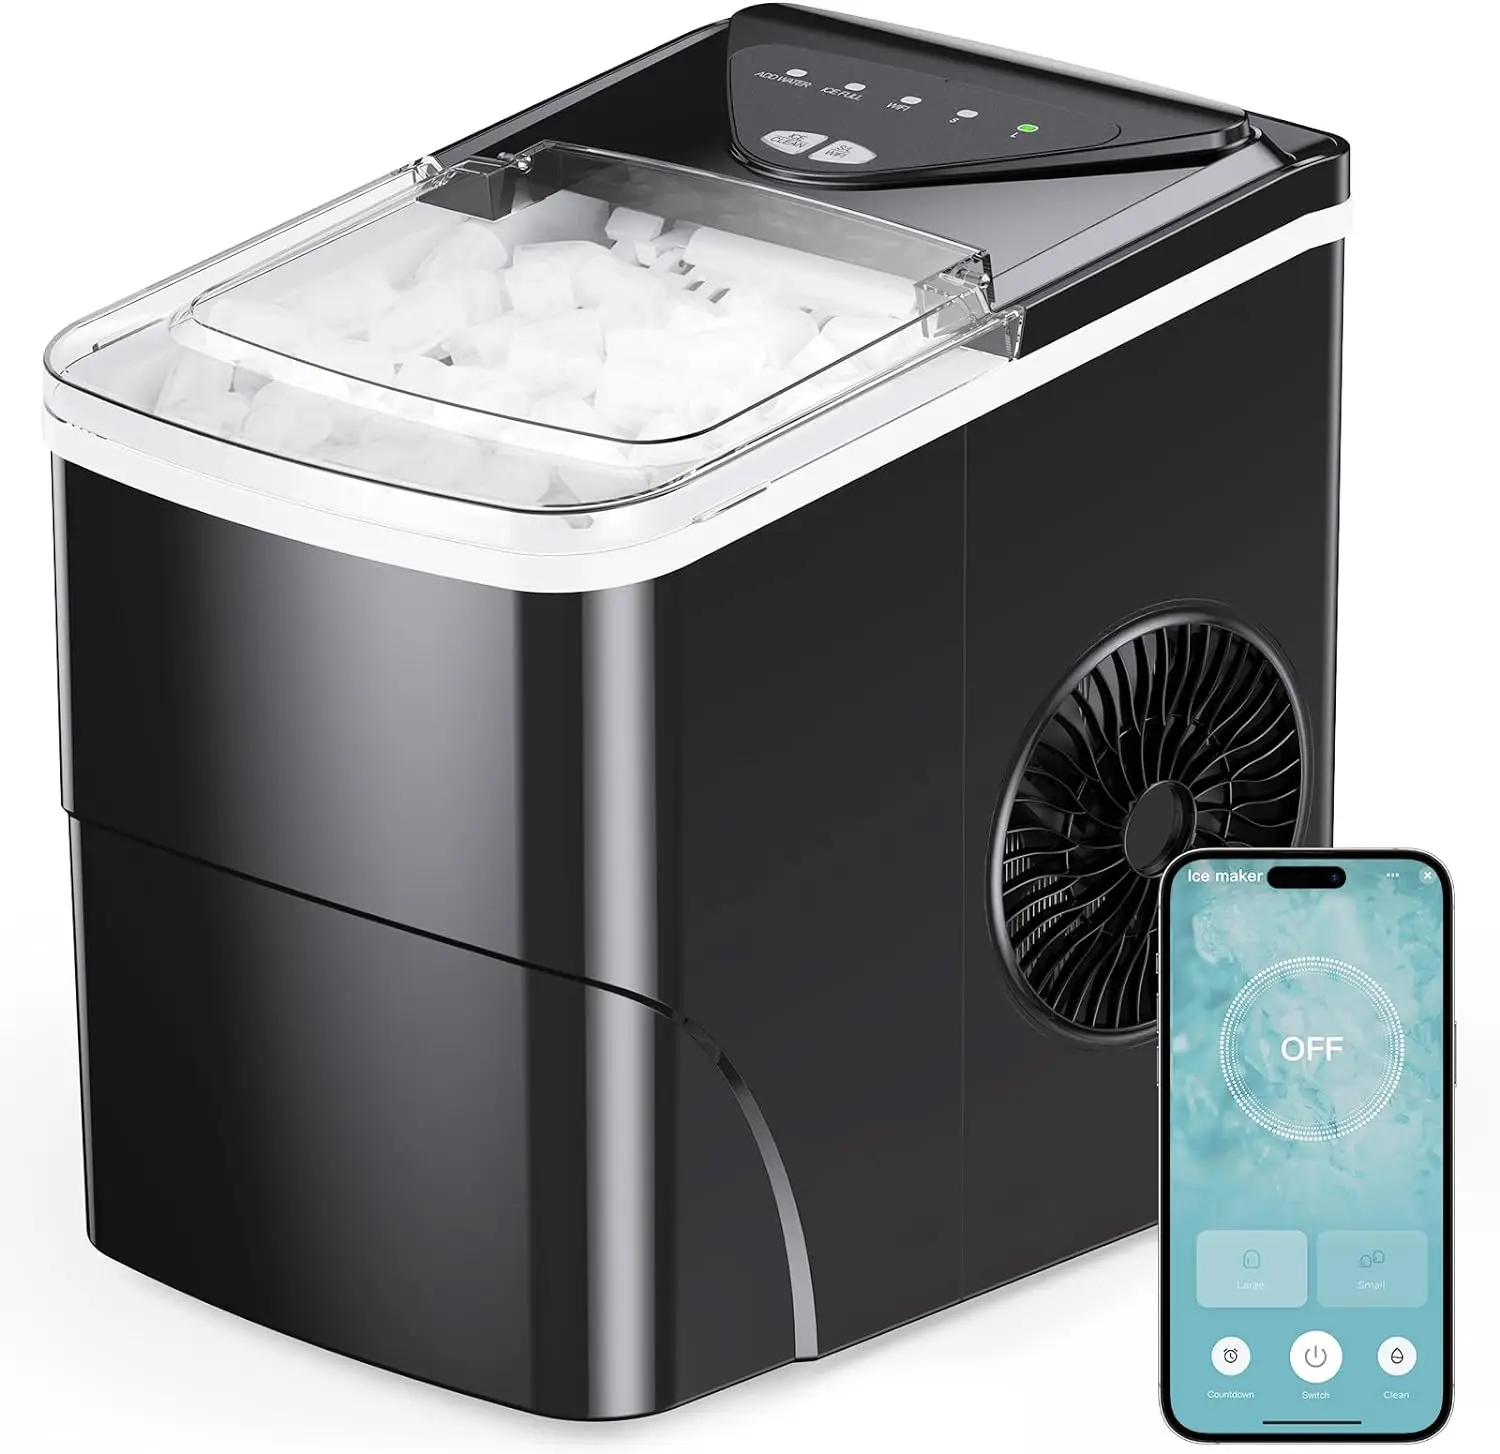 

Smart Countertop Ice Maker, Compact Wi-Fi Ice Maker w/ App Control, 9 Cubes in 6 Mins, 26 lbs per Day, Portable Ice Maker